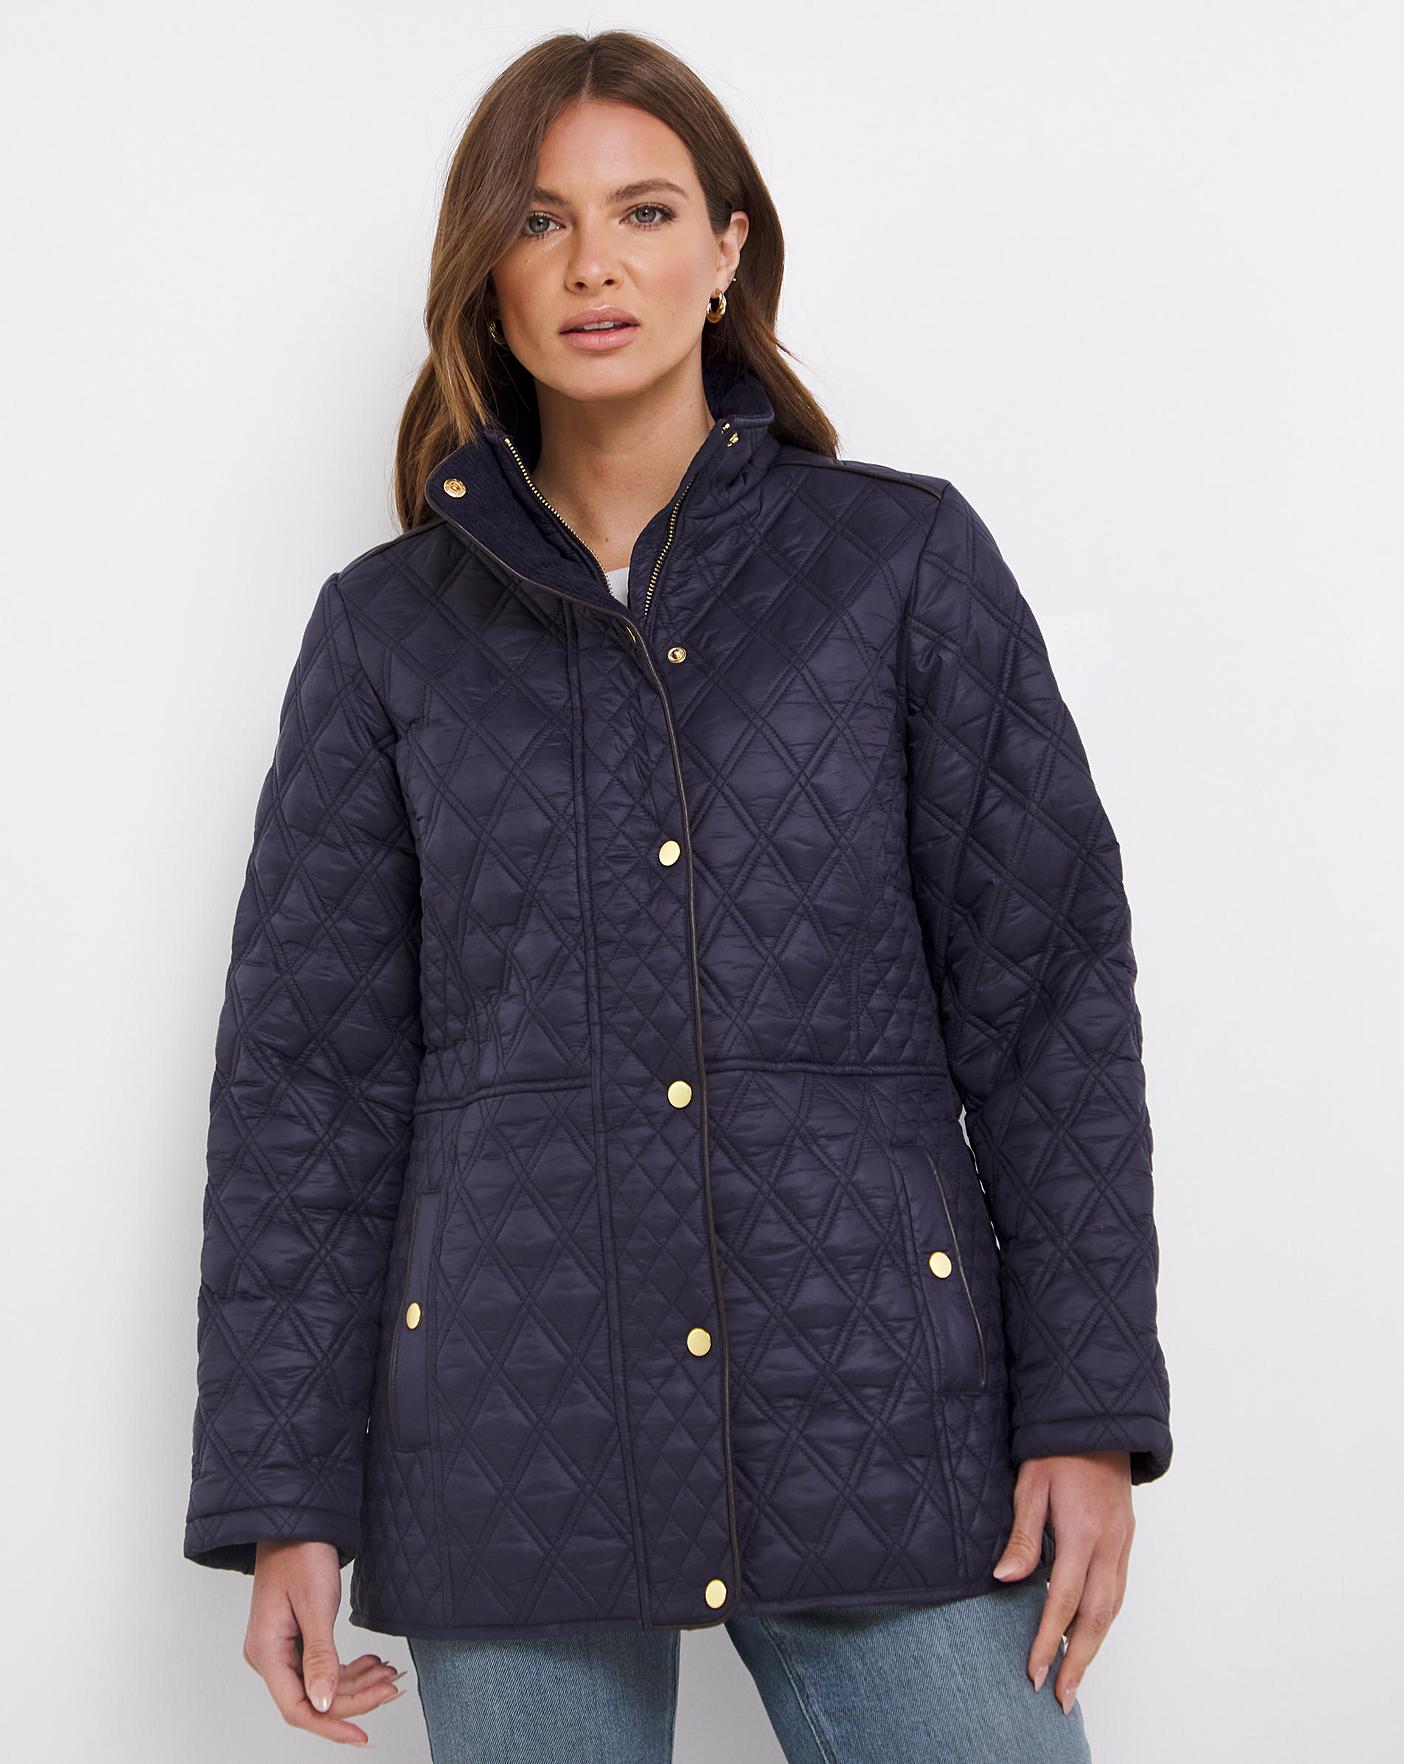 Julipa Quilted Jacket | J D Williams